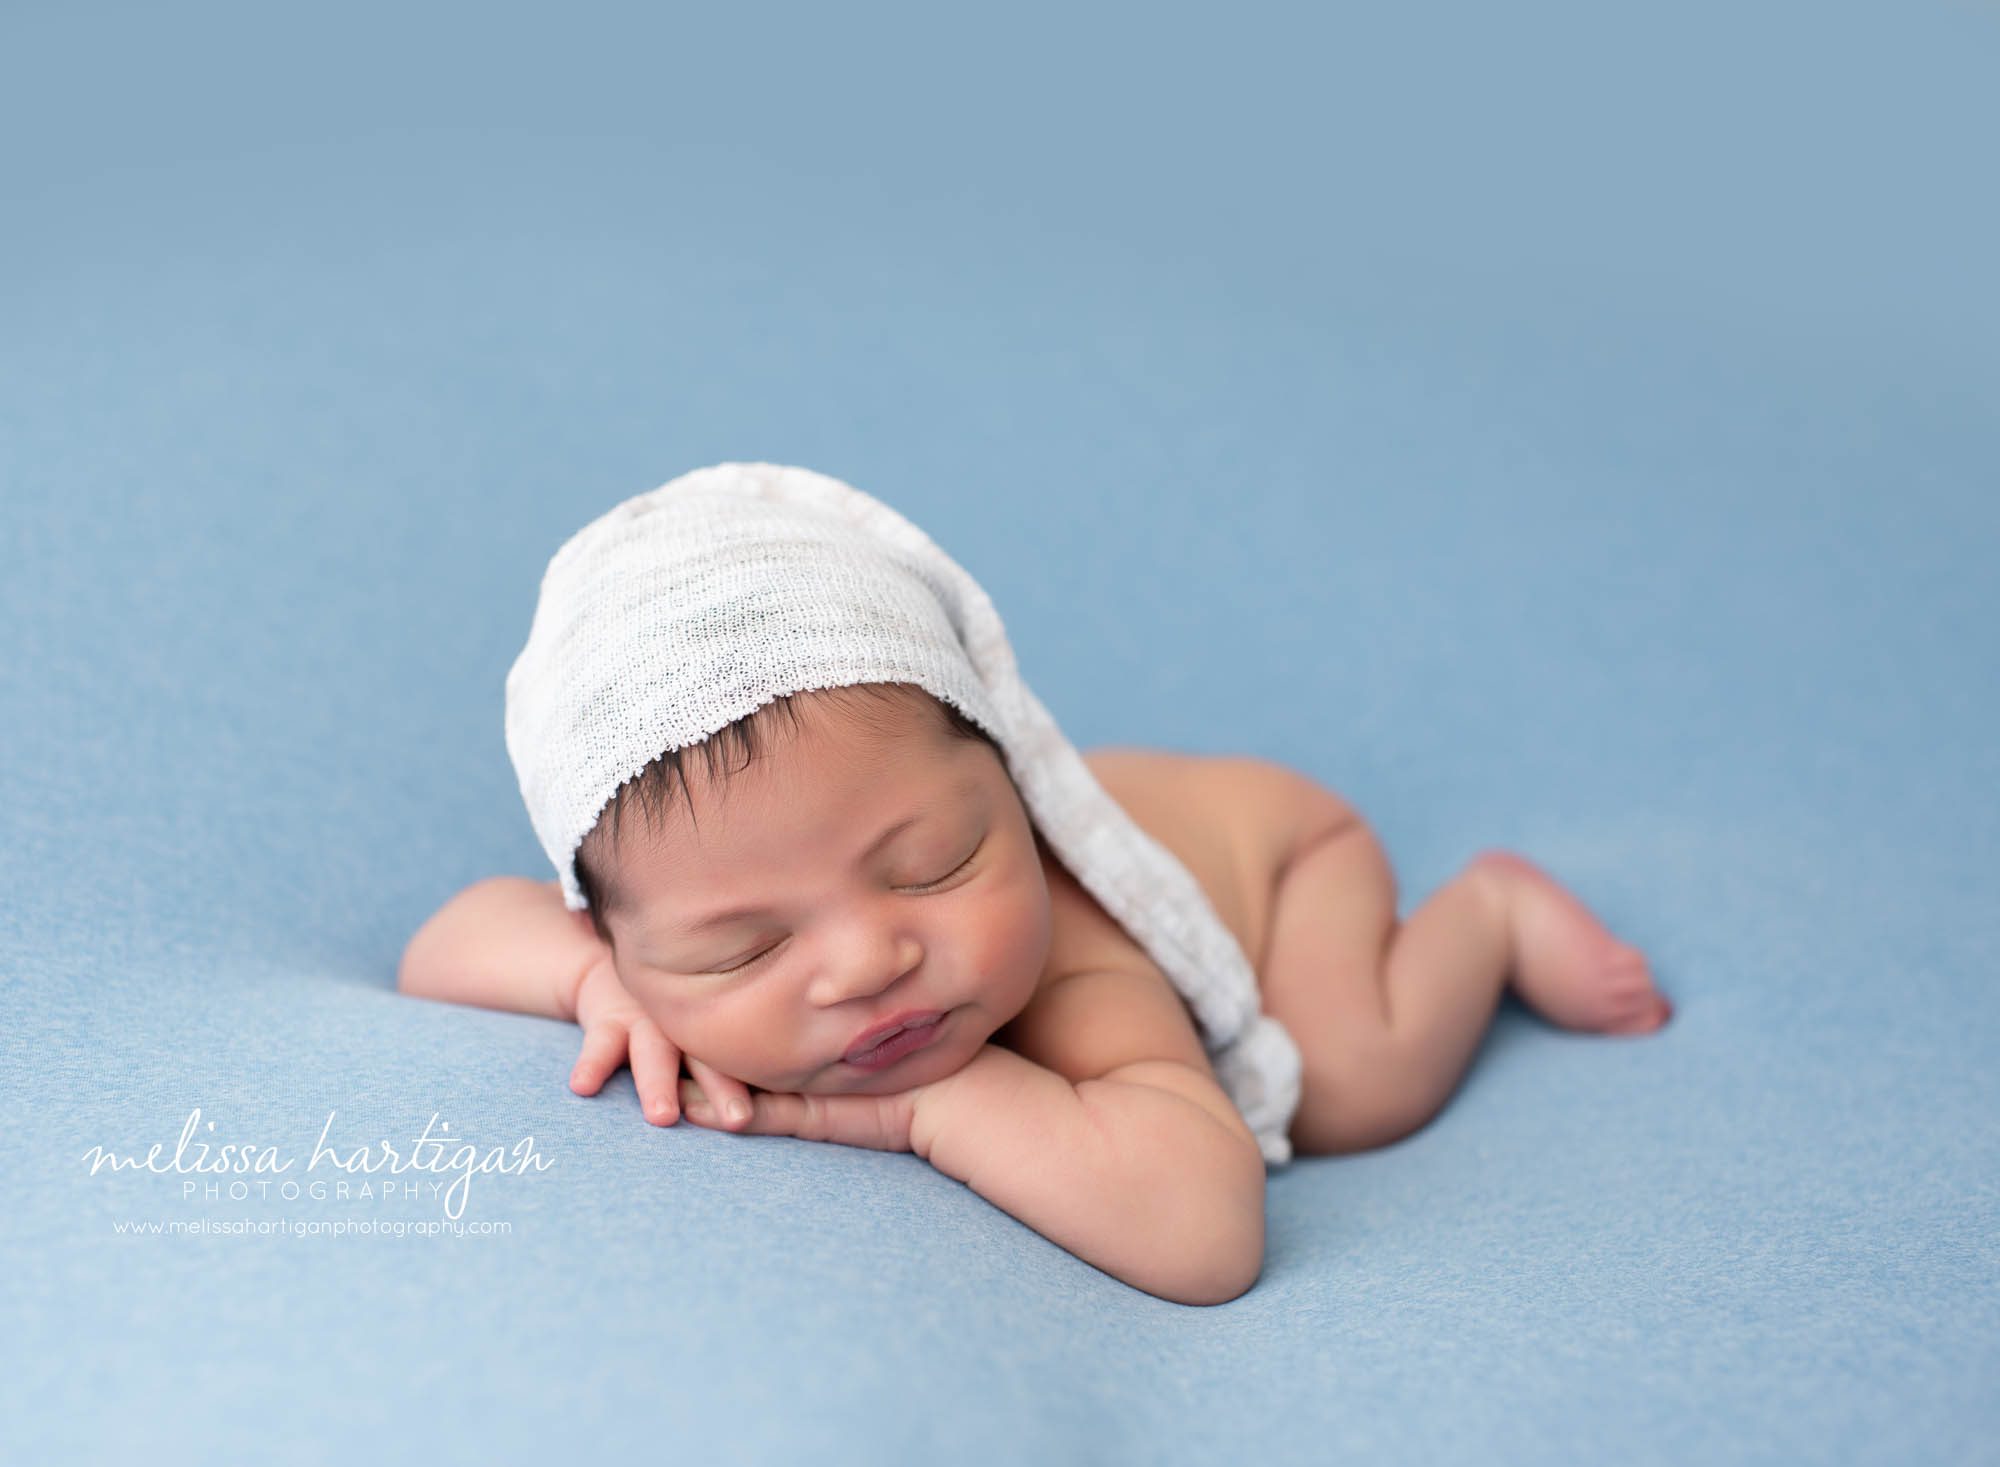 Baby boy posed on blue backdrop with cream sleepy cap and sleeping in adorable pose